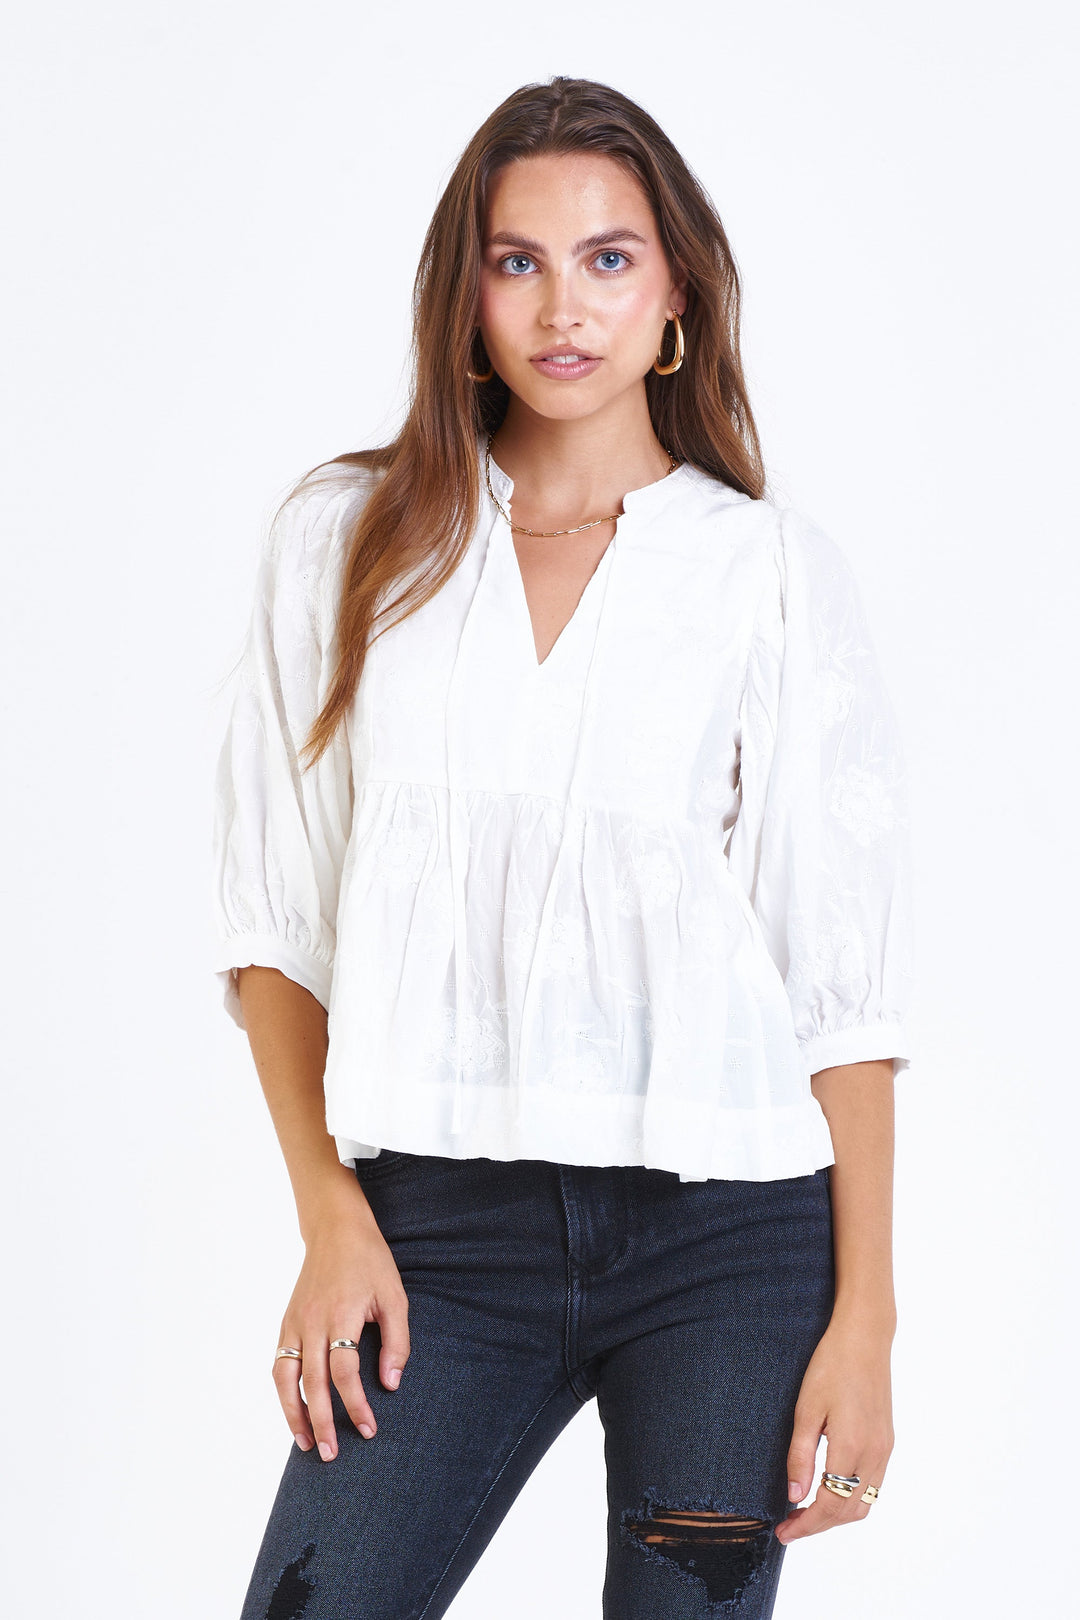 image of a female model wearing a MALIA V-NECK TOP PEARLED IVORY FLORAL TOPS